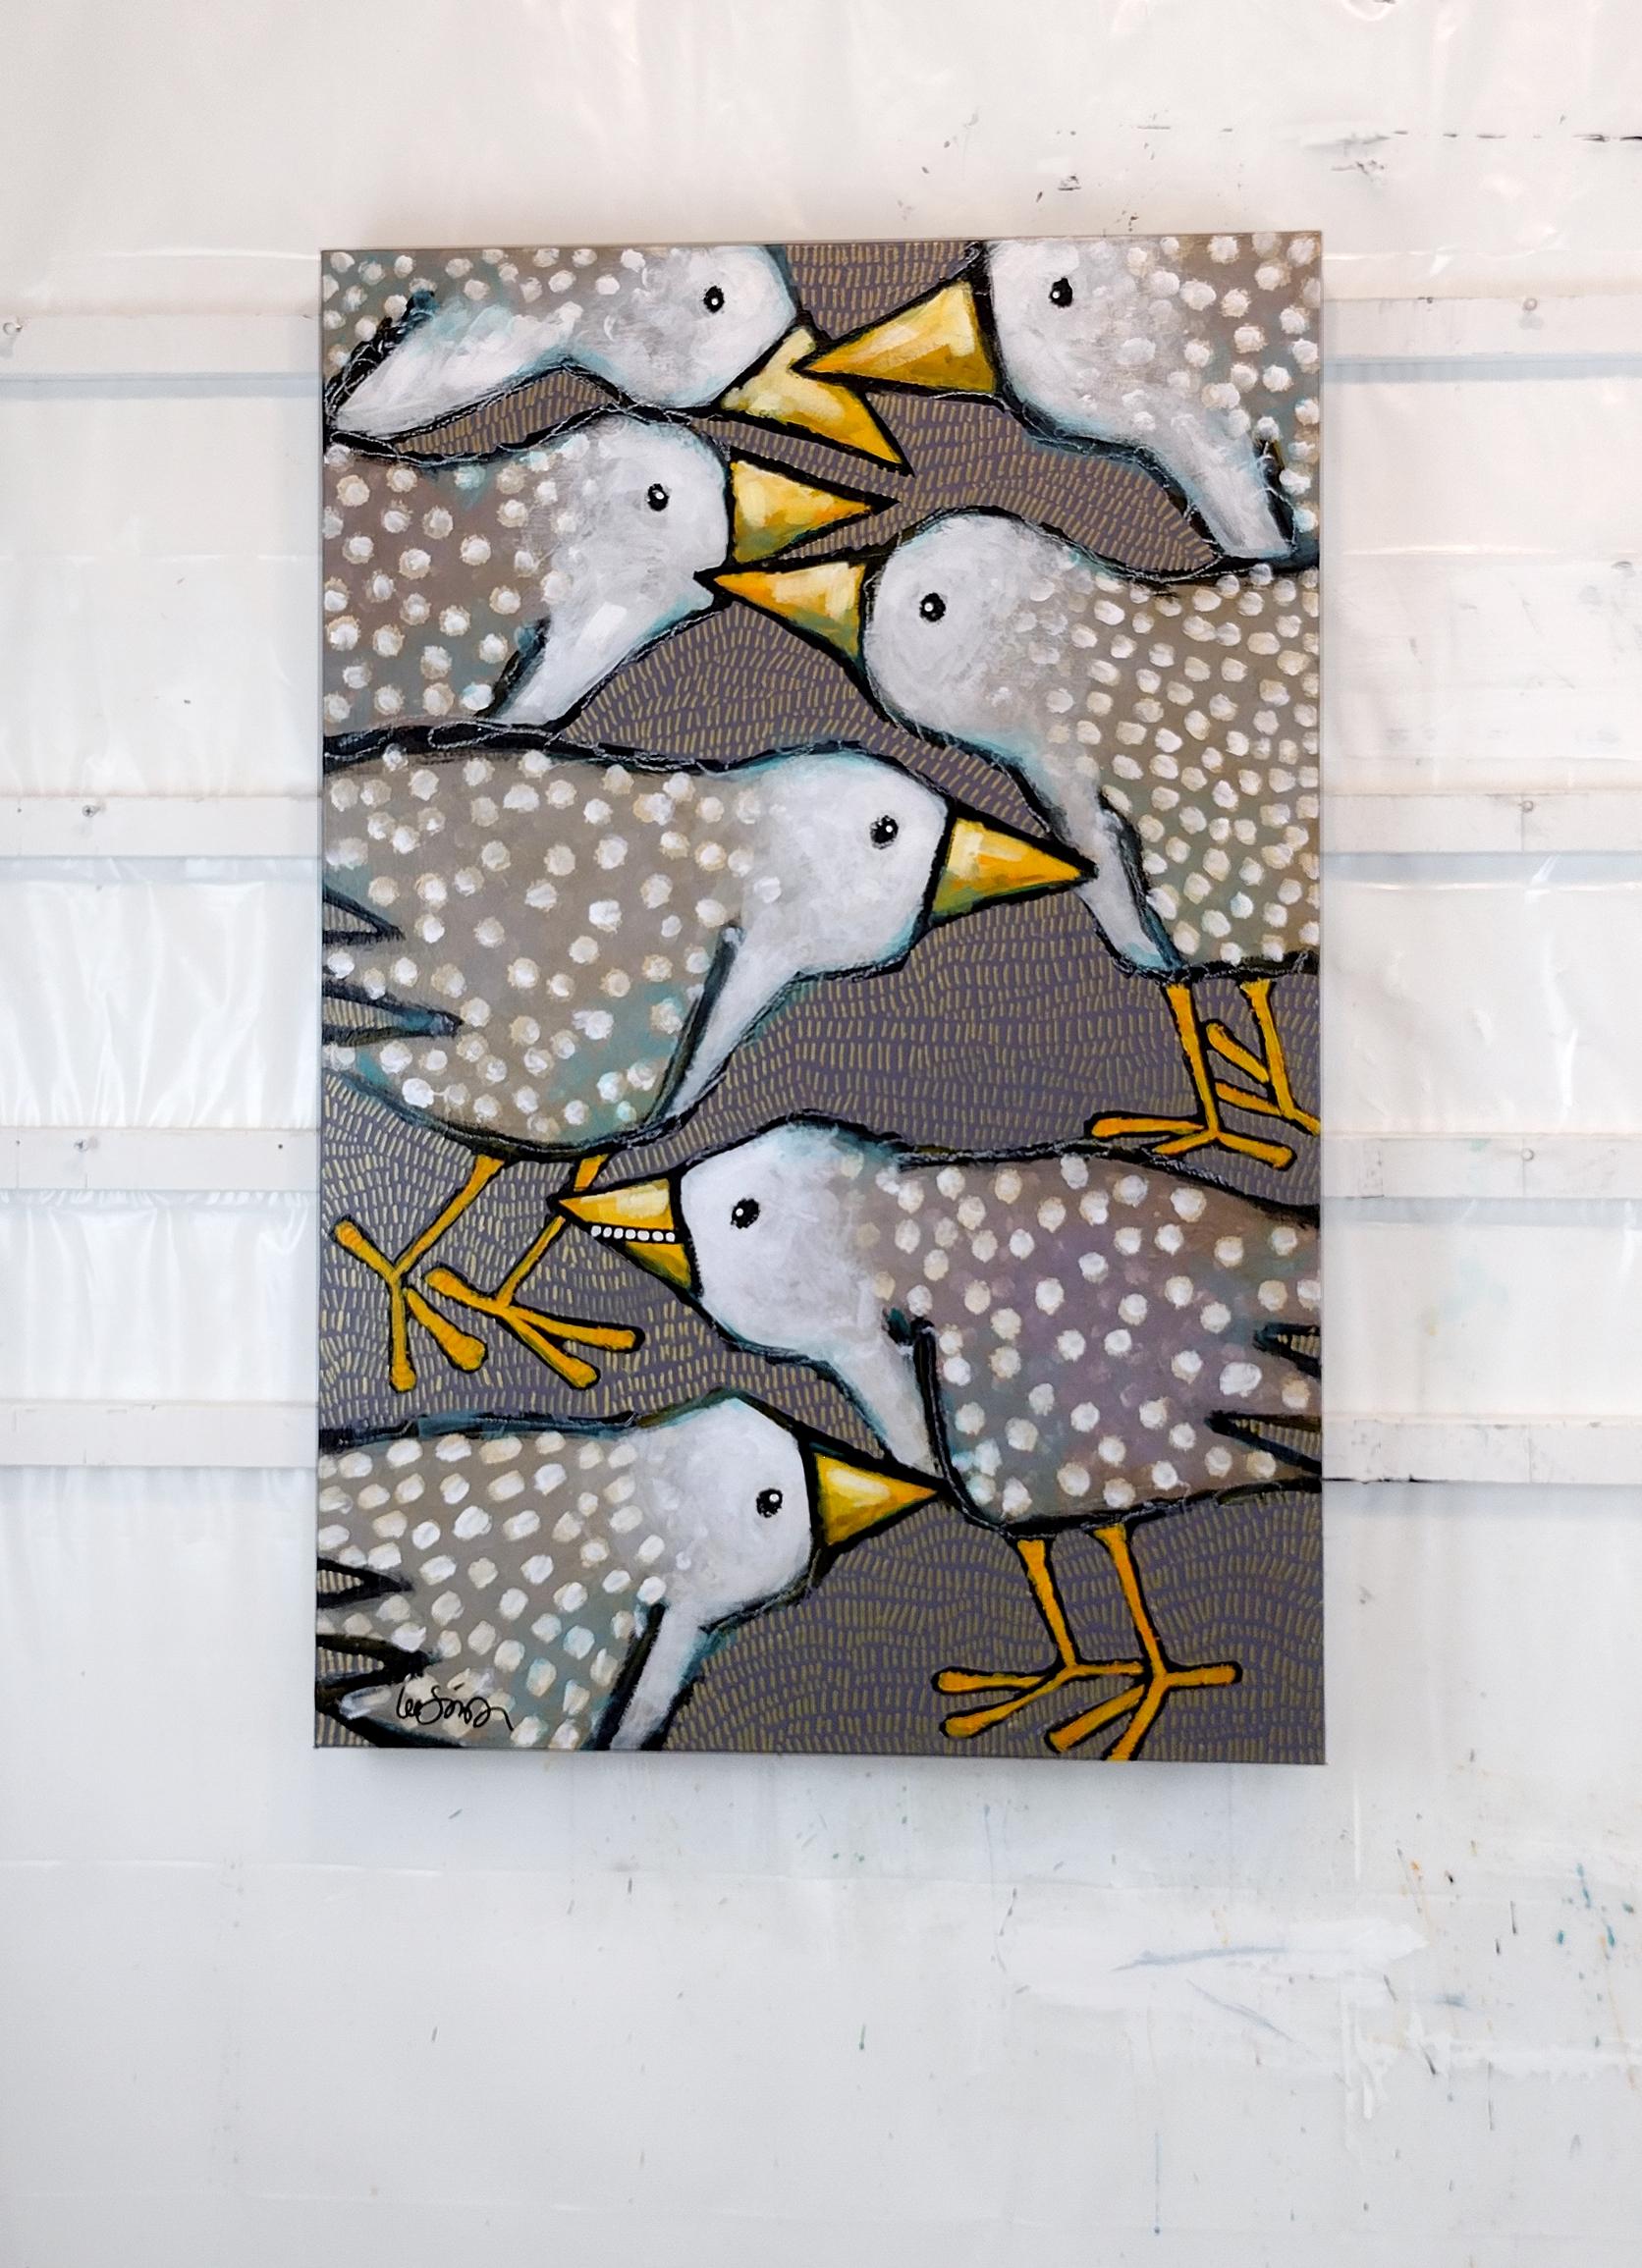 <p>Artist Comments<br />Artist Lee Smith presents seven bird friends gathered together, one grinning with joy. Bold brushstrokes outline each bird with coordinated gray shades applied by both brush and fingers. Lee meticulously details the rich